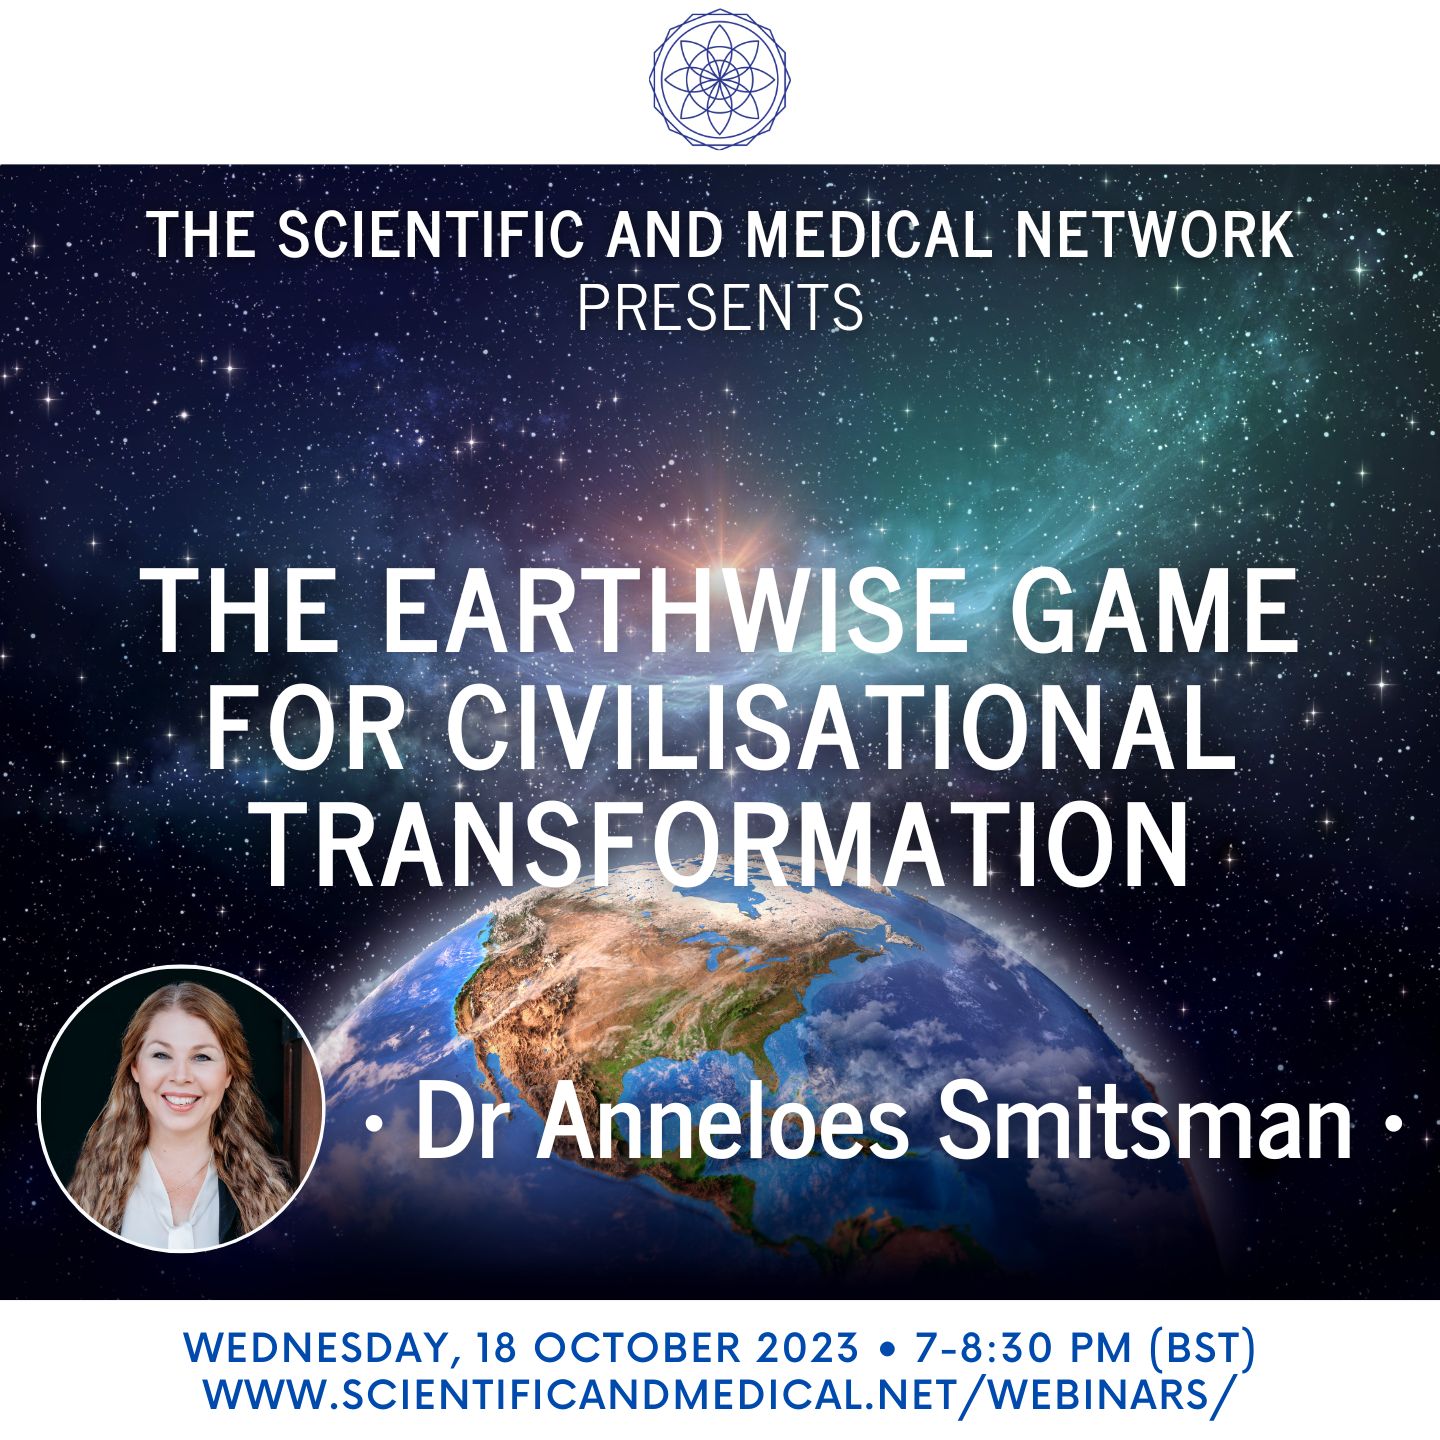 Dr Anneloes Smitsman The EARTHwise Game for Civilisational Transformation